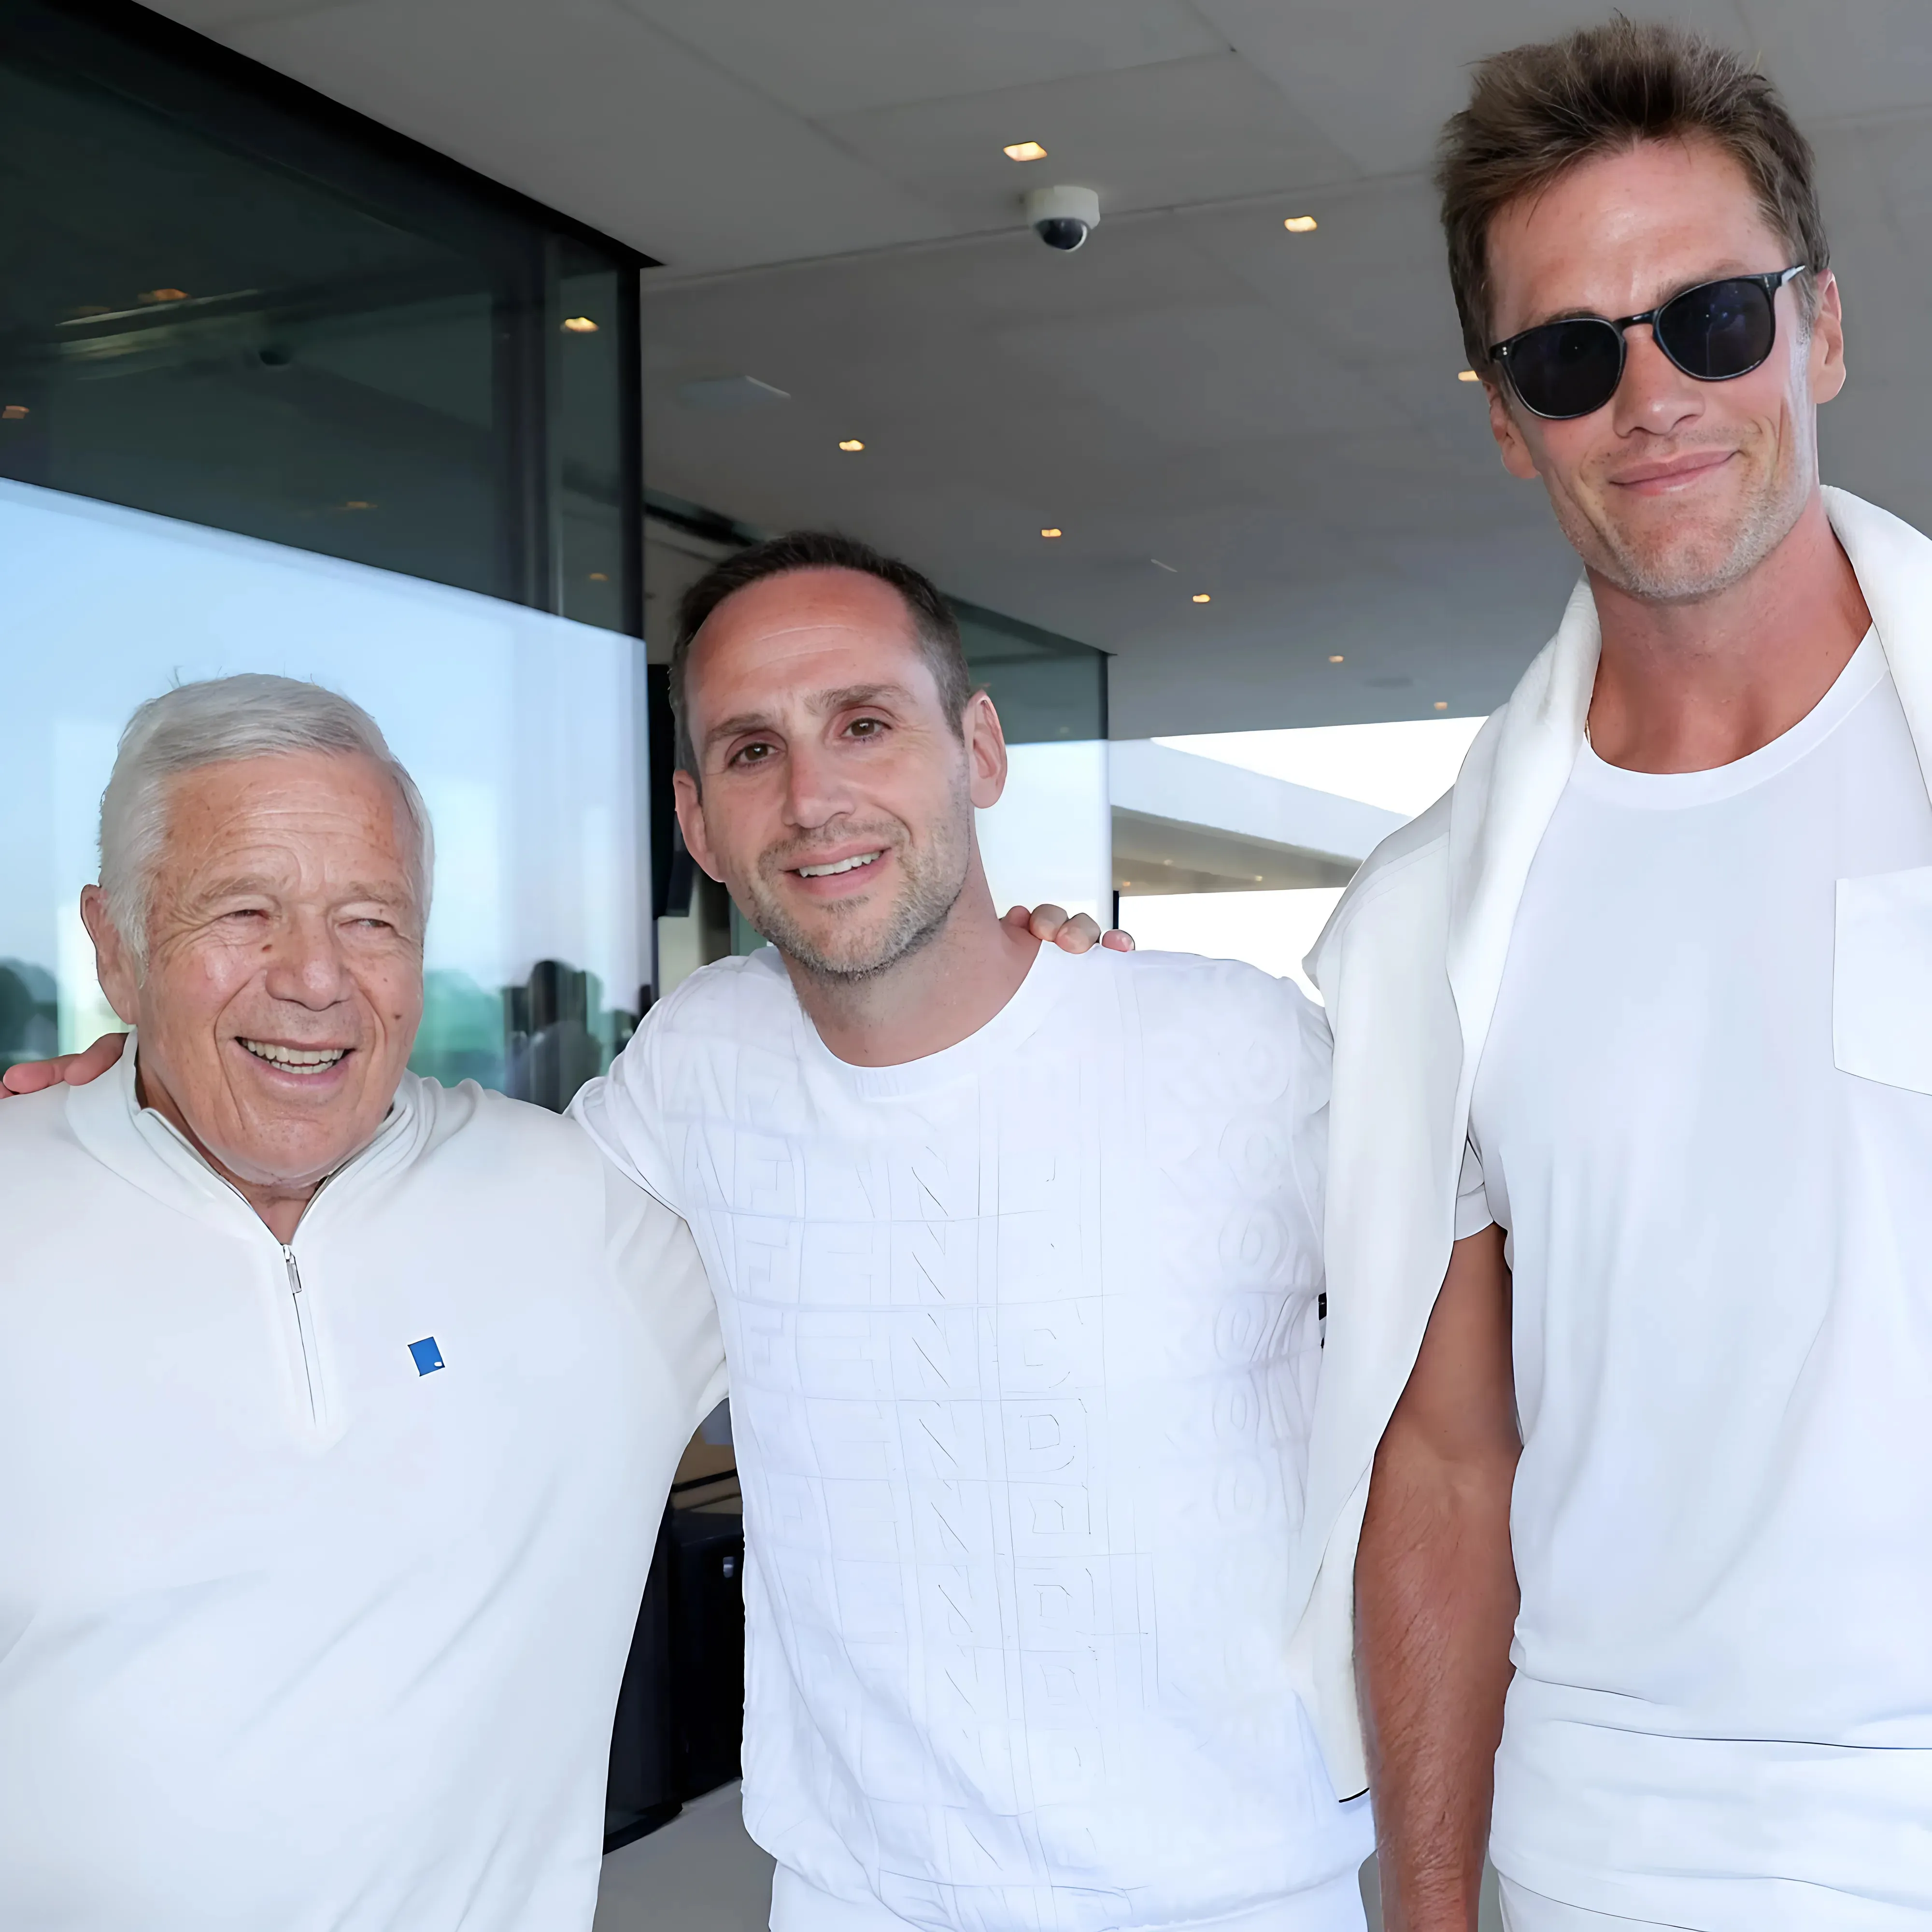 Tom Brady receives special invite to Michael Rubin’s White Party as he shows off gift ahead of Fourth of July bash